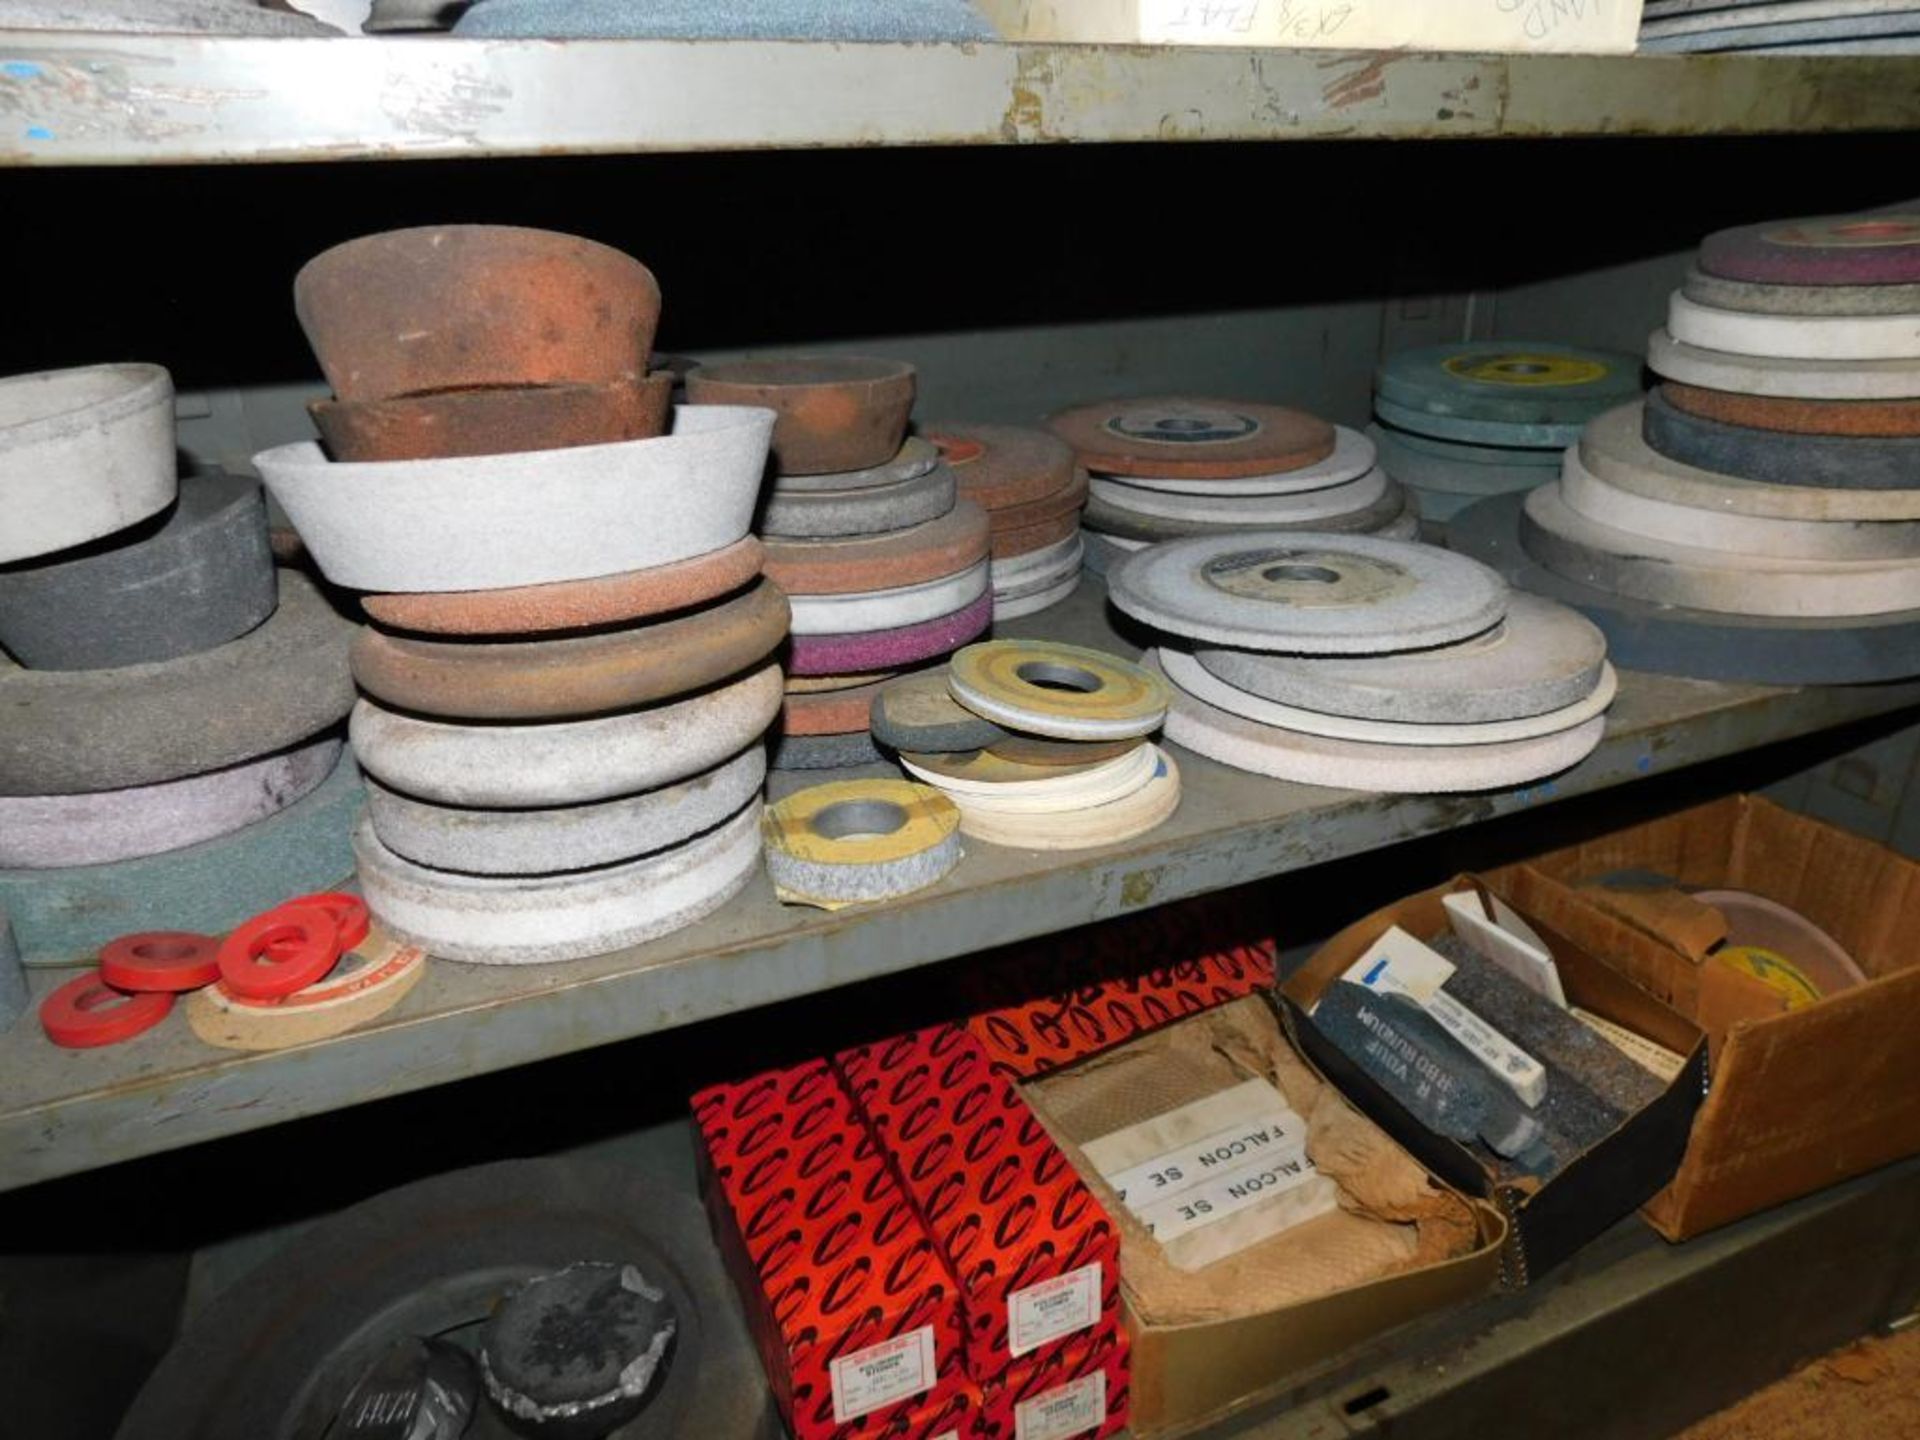 LOT: Contents of Rack: Large Quantity of Assorted Grinding Wheels, Cut Off Wheels, Polishing Stones, - Image 6 of 15